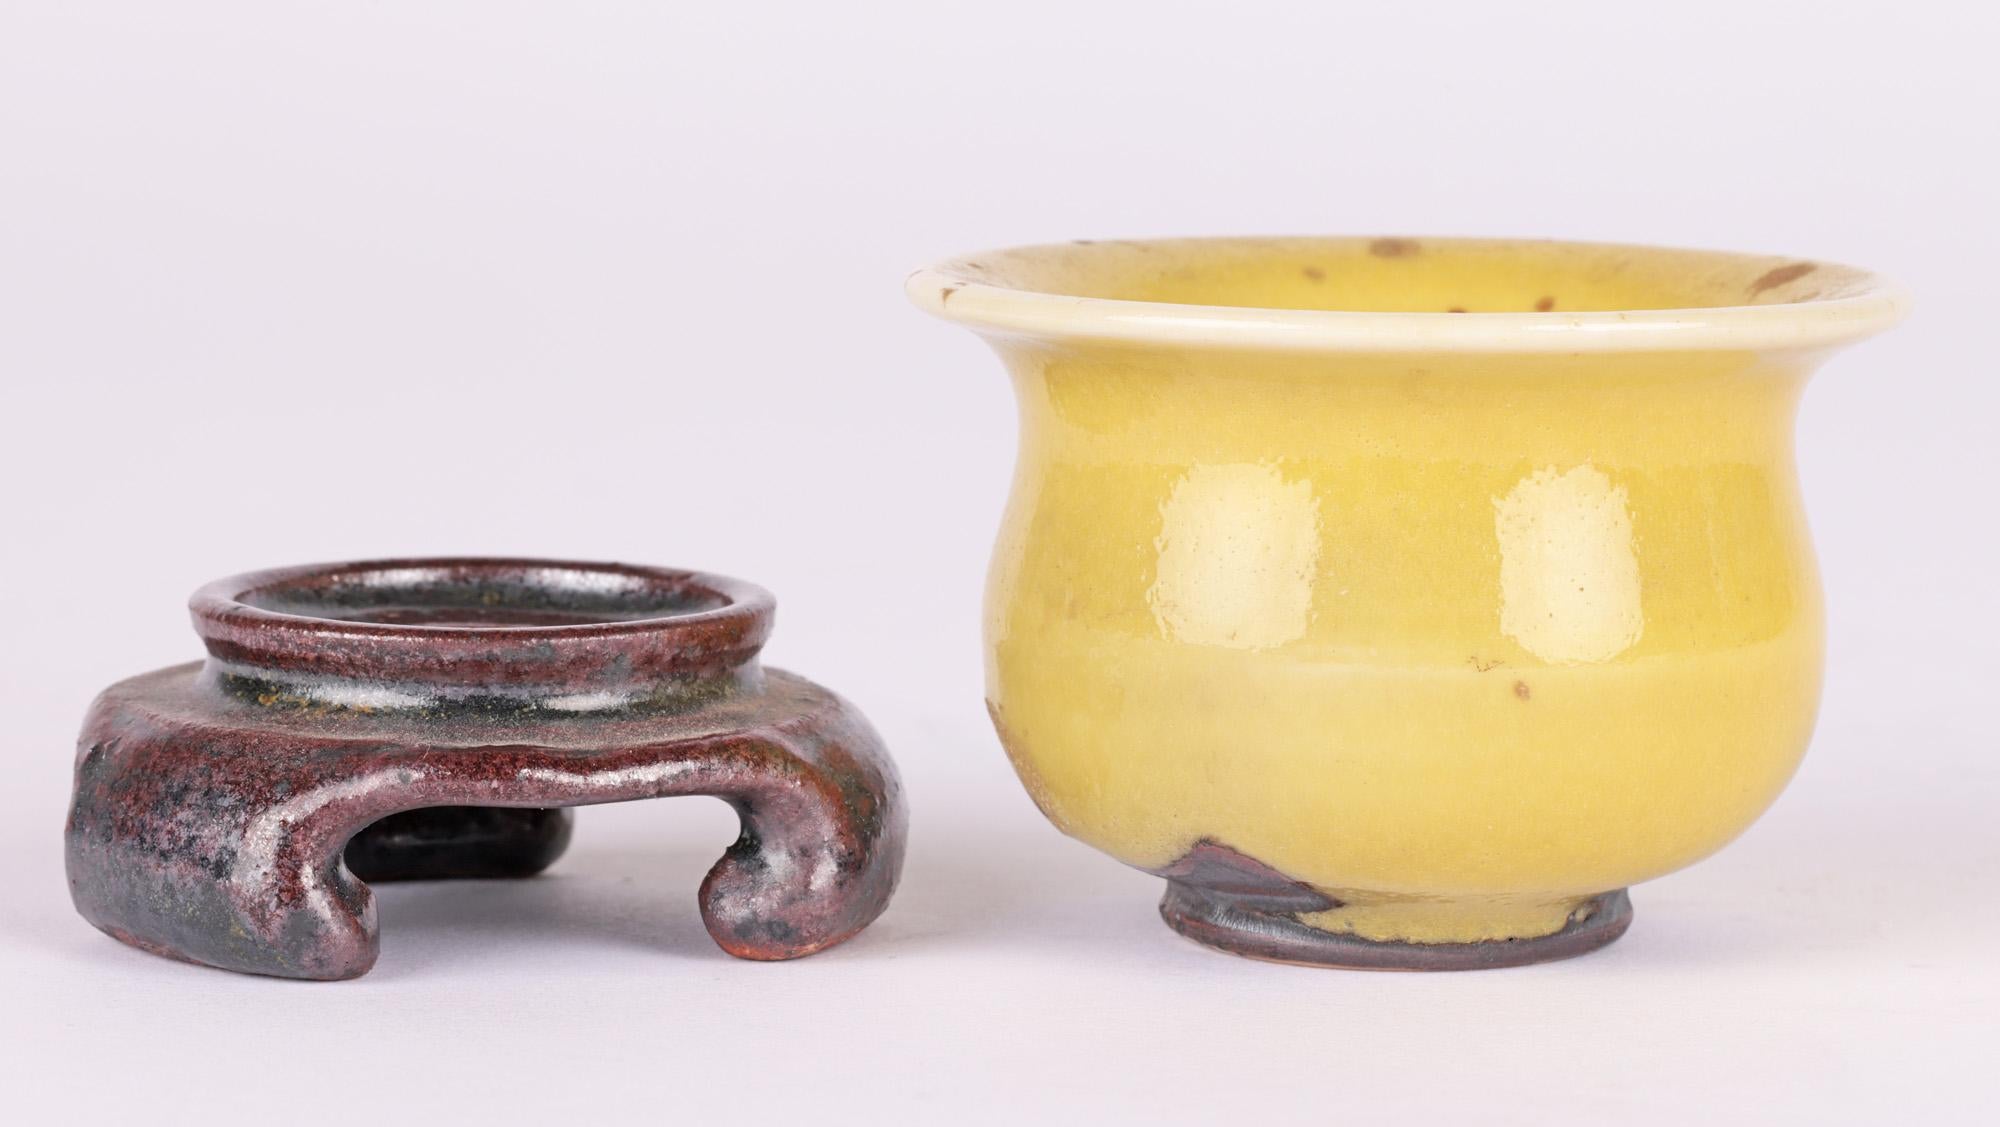 A stunning Canadian studio pottery miniature bowl decorated in yellow glazes with an associated pottery stand by Lane Gordon Thorlaksson (Canadian, 1937-2009) dated 1976. 

Lane Gordon Thorlaksson was born in 1937 in Winnipeg, Manitoba and moved